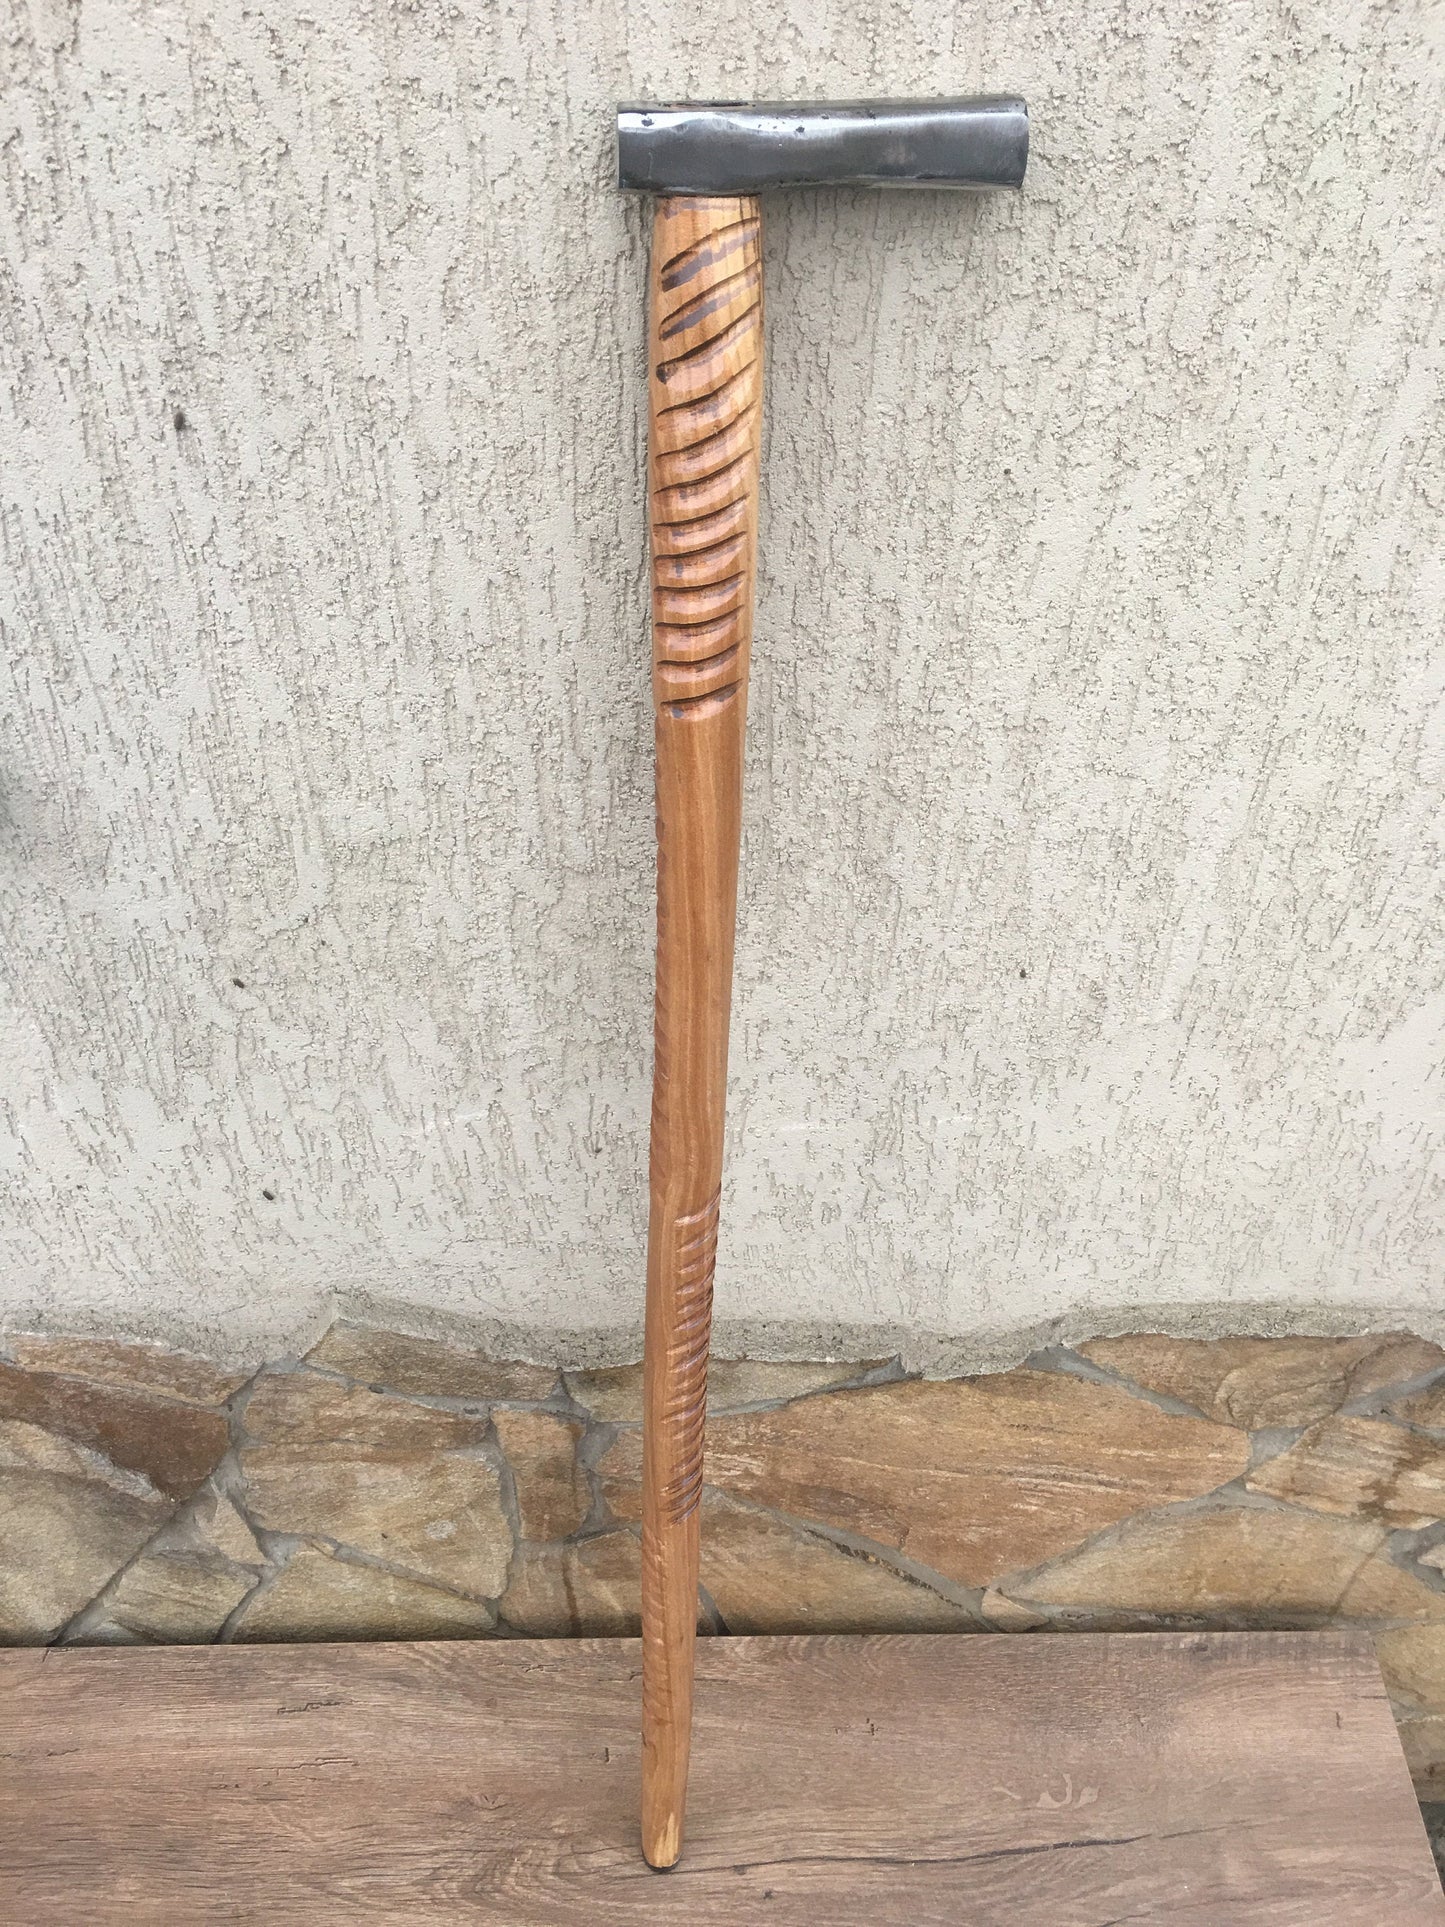 Walking cane, walking stick, walking stick cane, cane, hammer, wood carving, hammer head, art cane, fashion cane, iron gift for men, stick